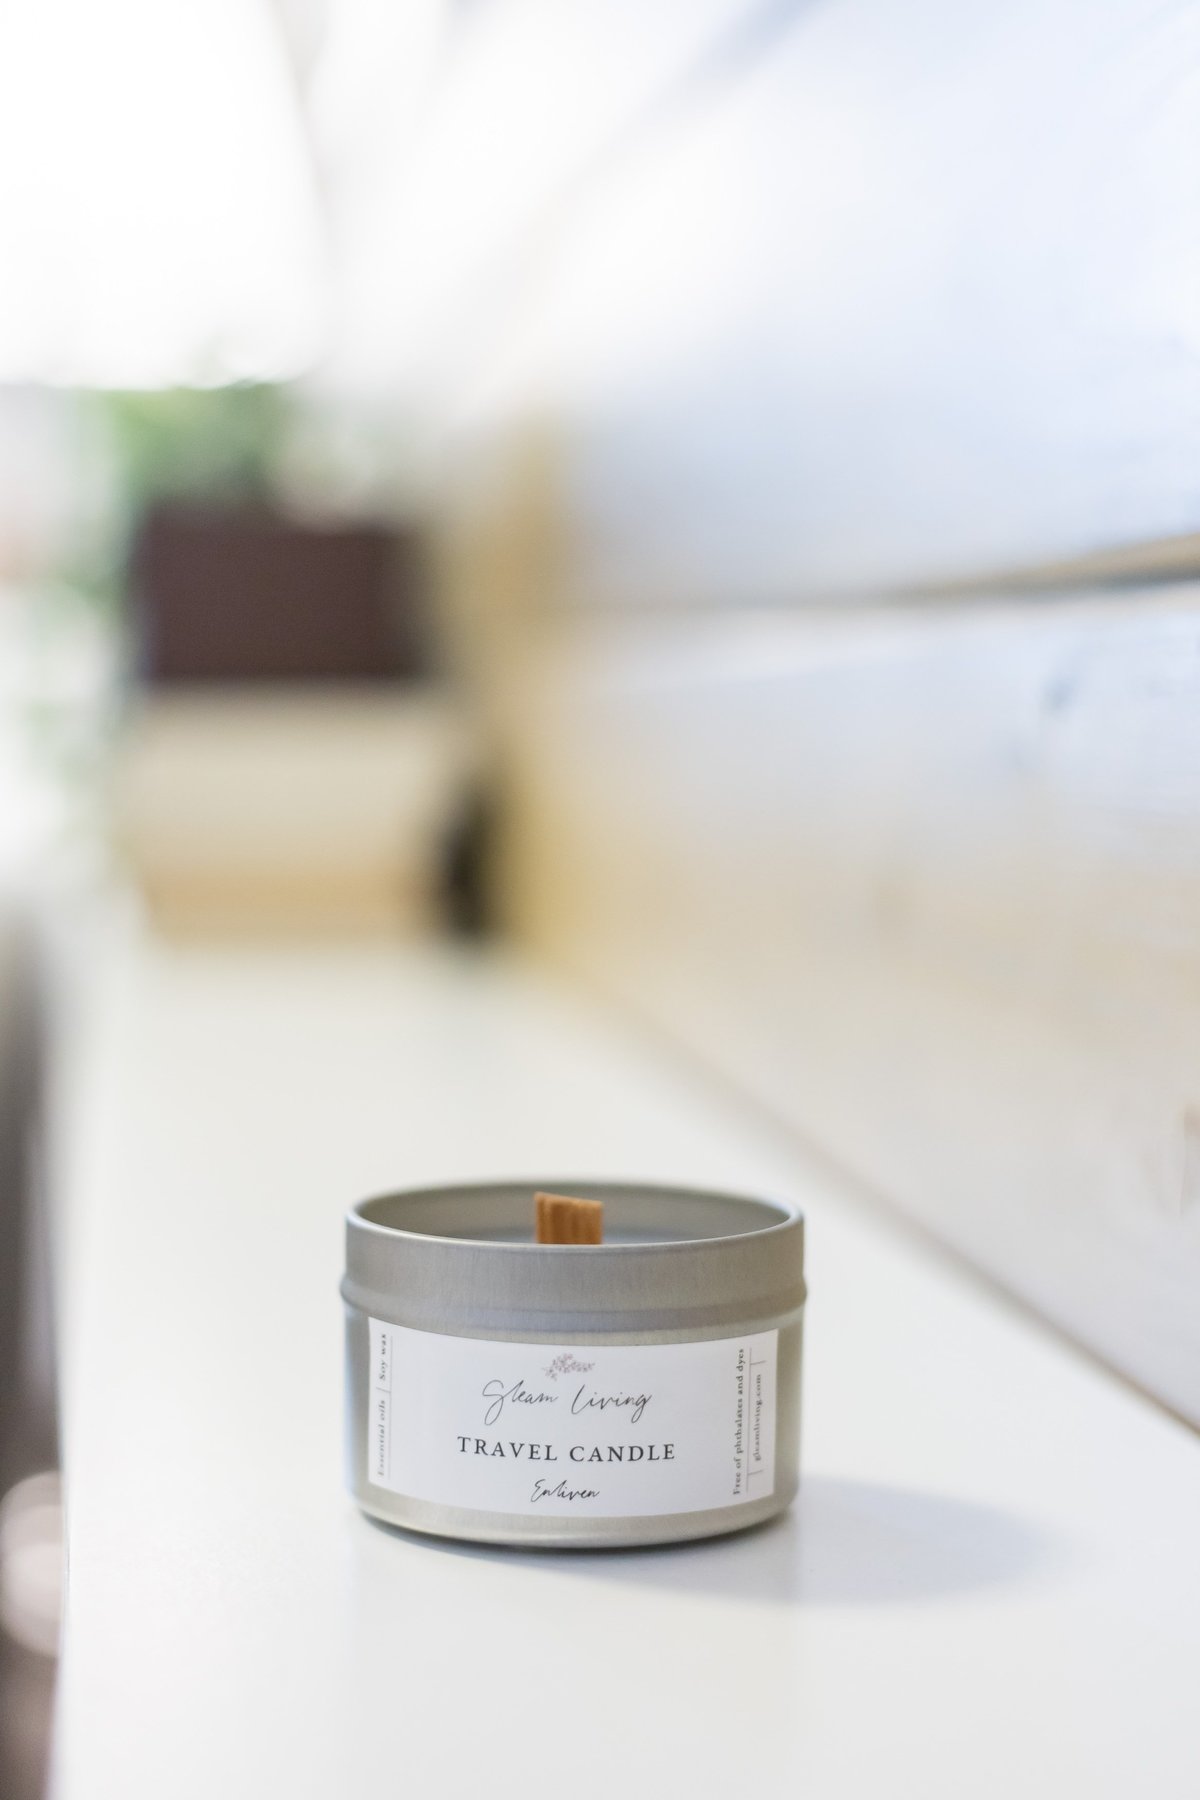 Atelier21 Co - Travel Candle-013